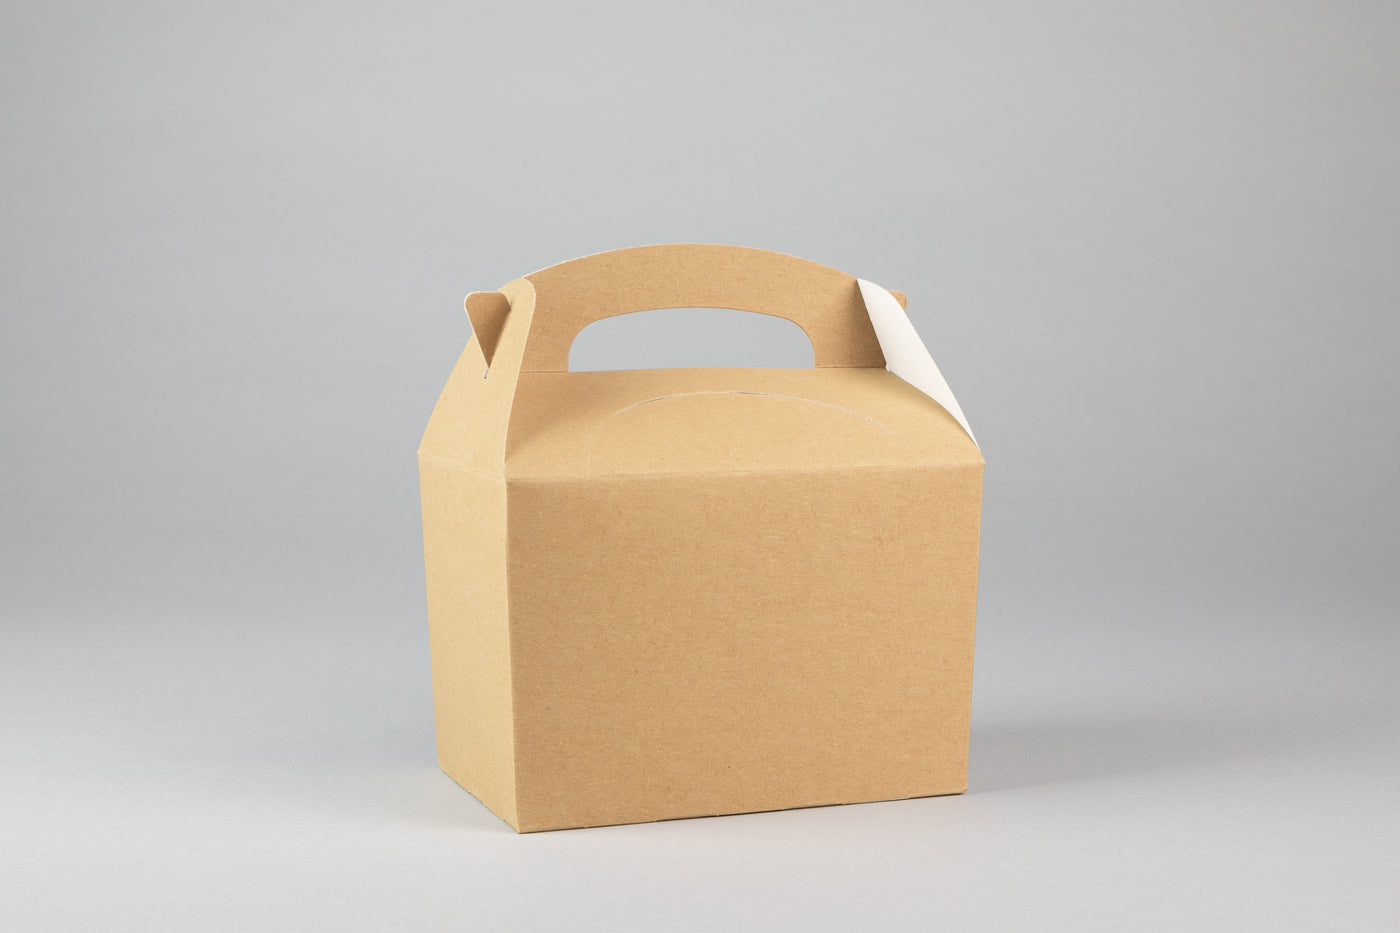 Gable Lunch Box with Handle